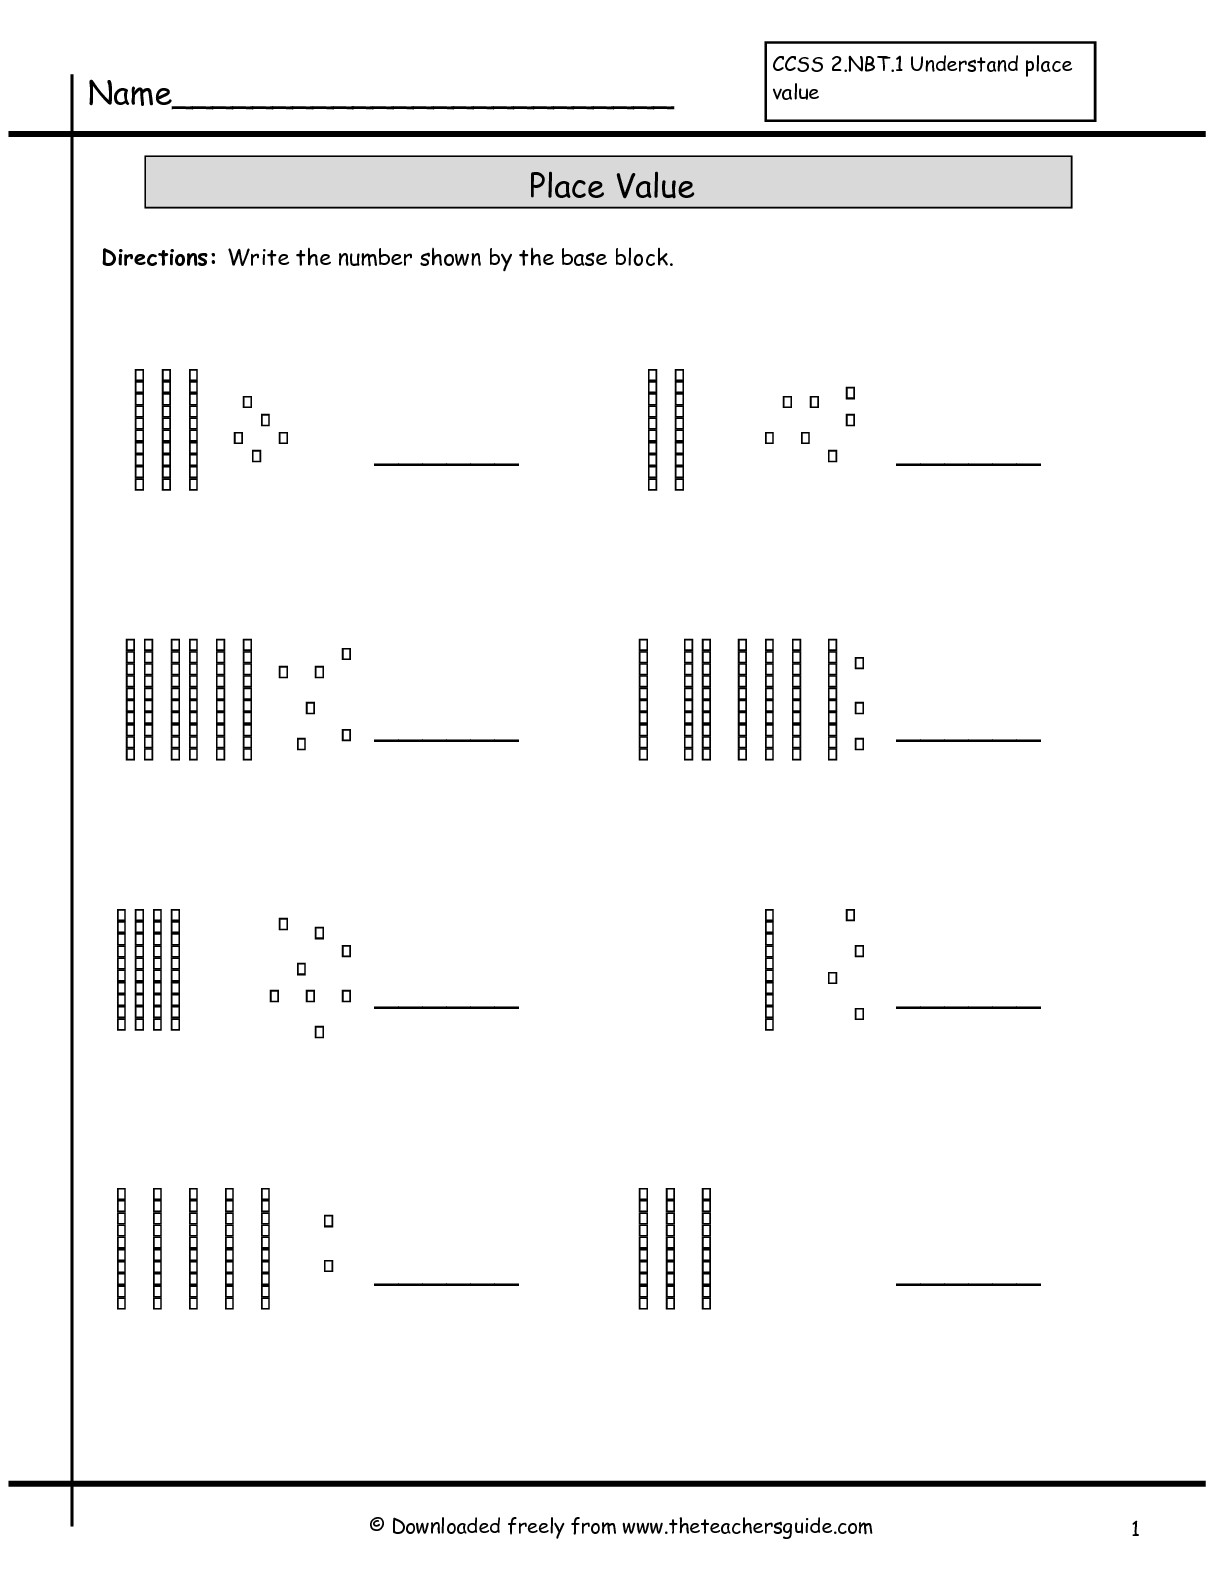 Place Value Worksheets From The Teacher S Guide